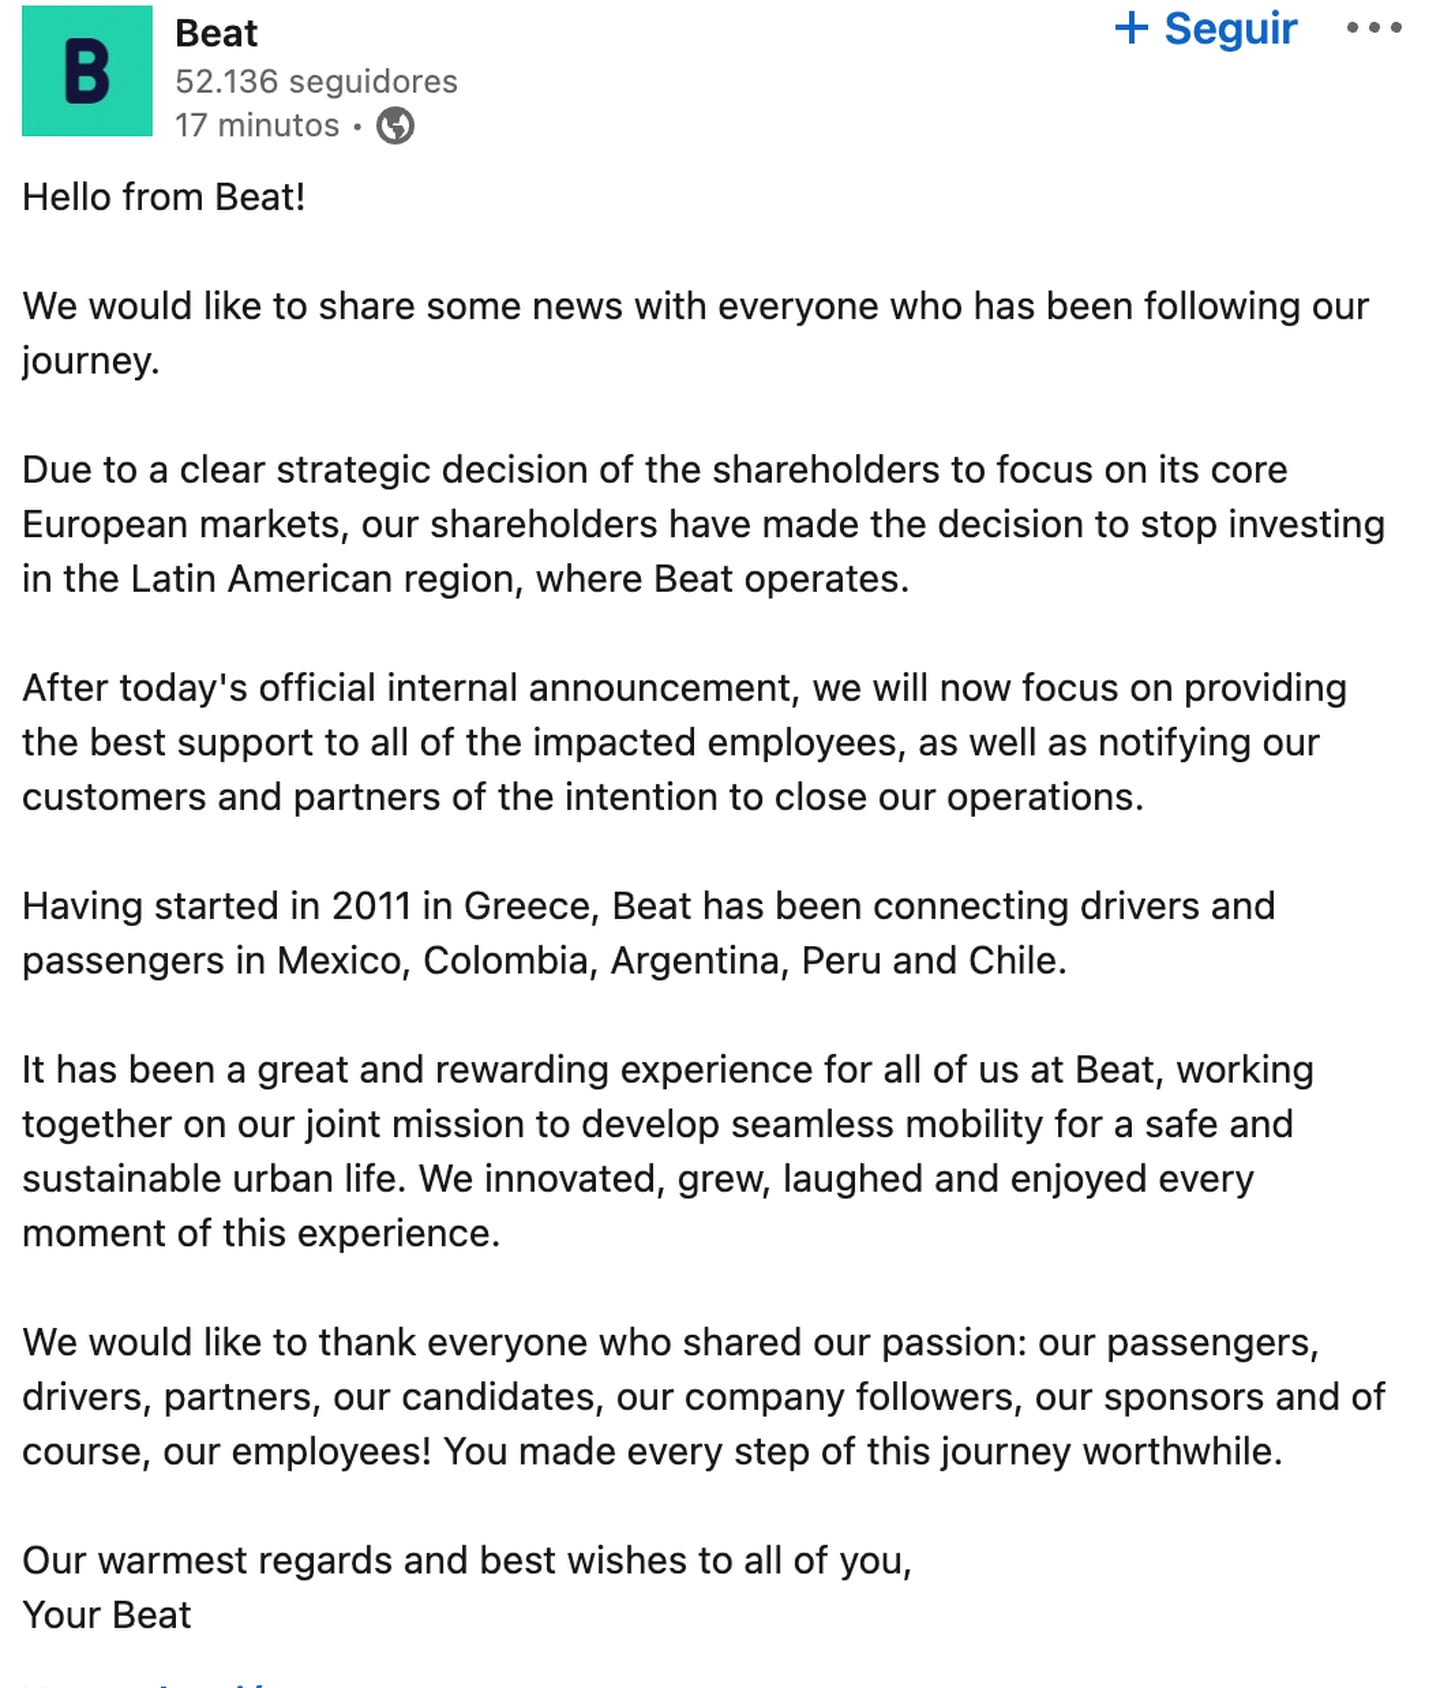 Beat announced the closure of its operations in Argentina, Mexico and Peru on its LinkedIn profile. dfd